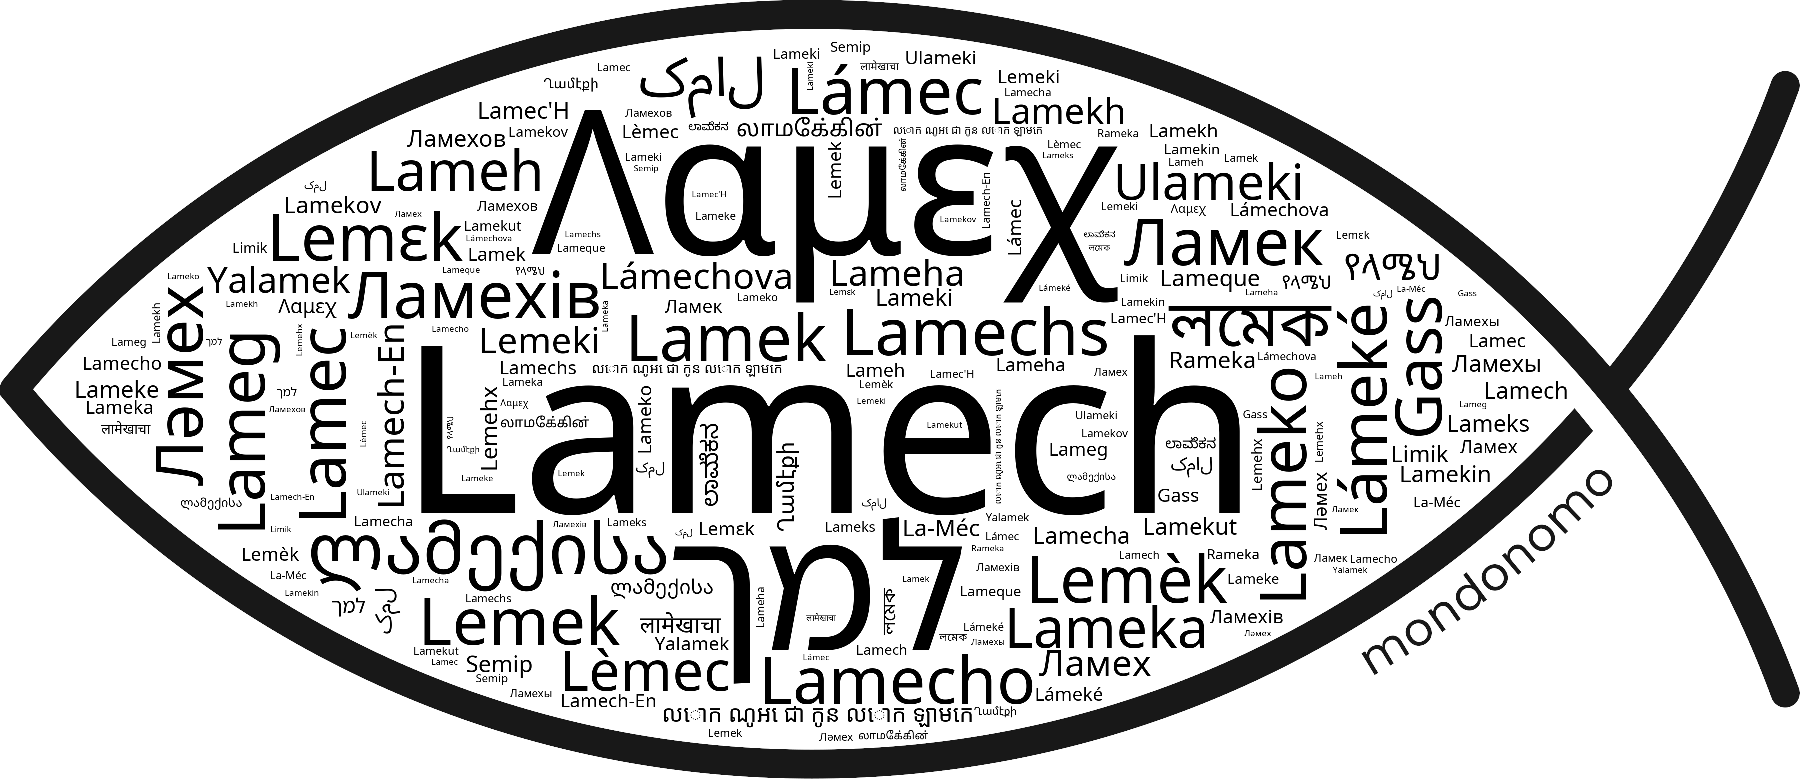 Name Lamech in the world's Bibles